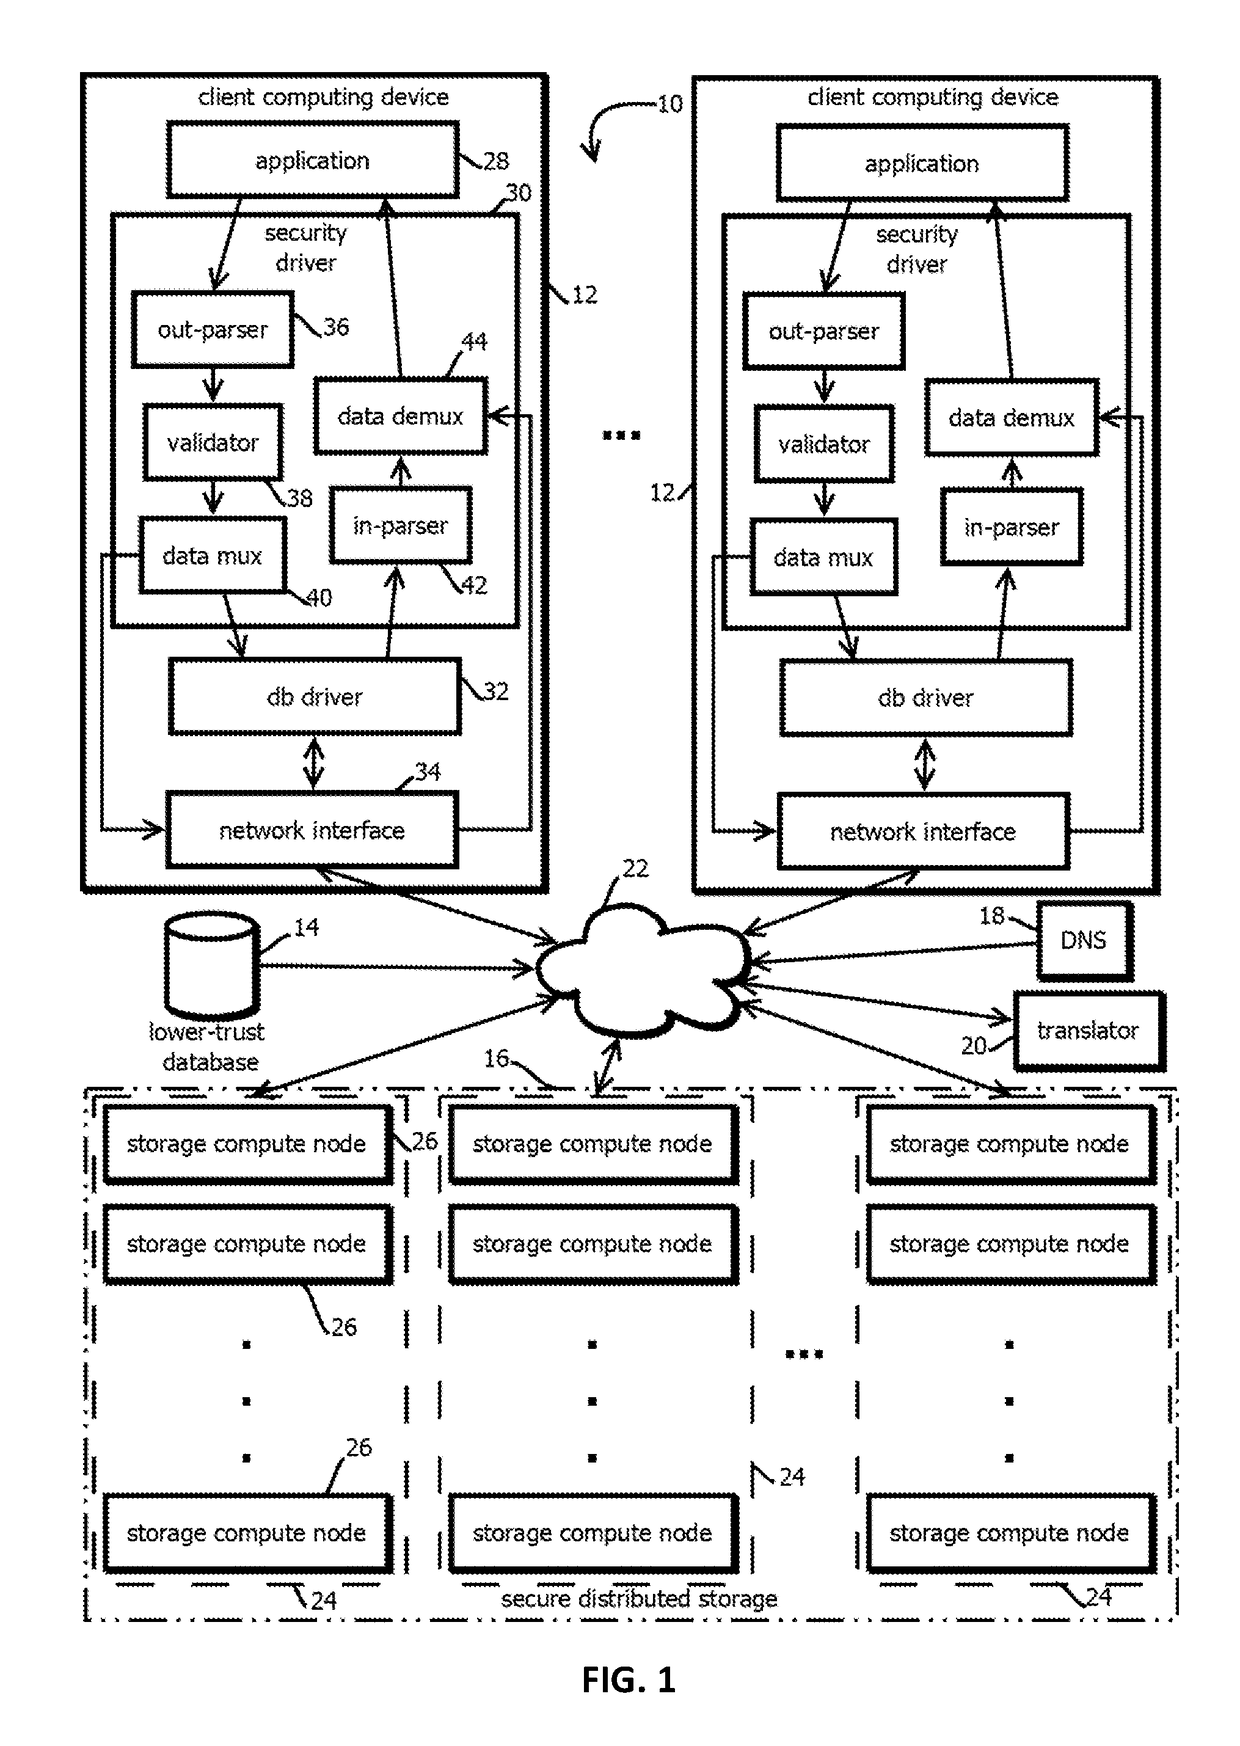 Transparent client application to arbitrate data storage between mutable and immutable data repositories